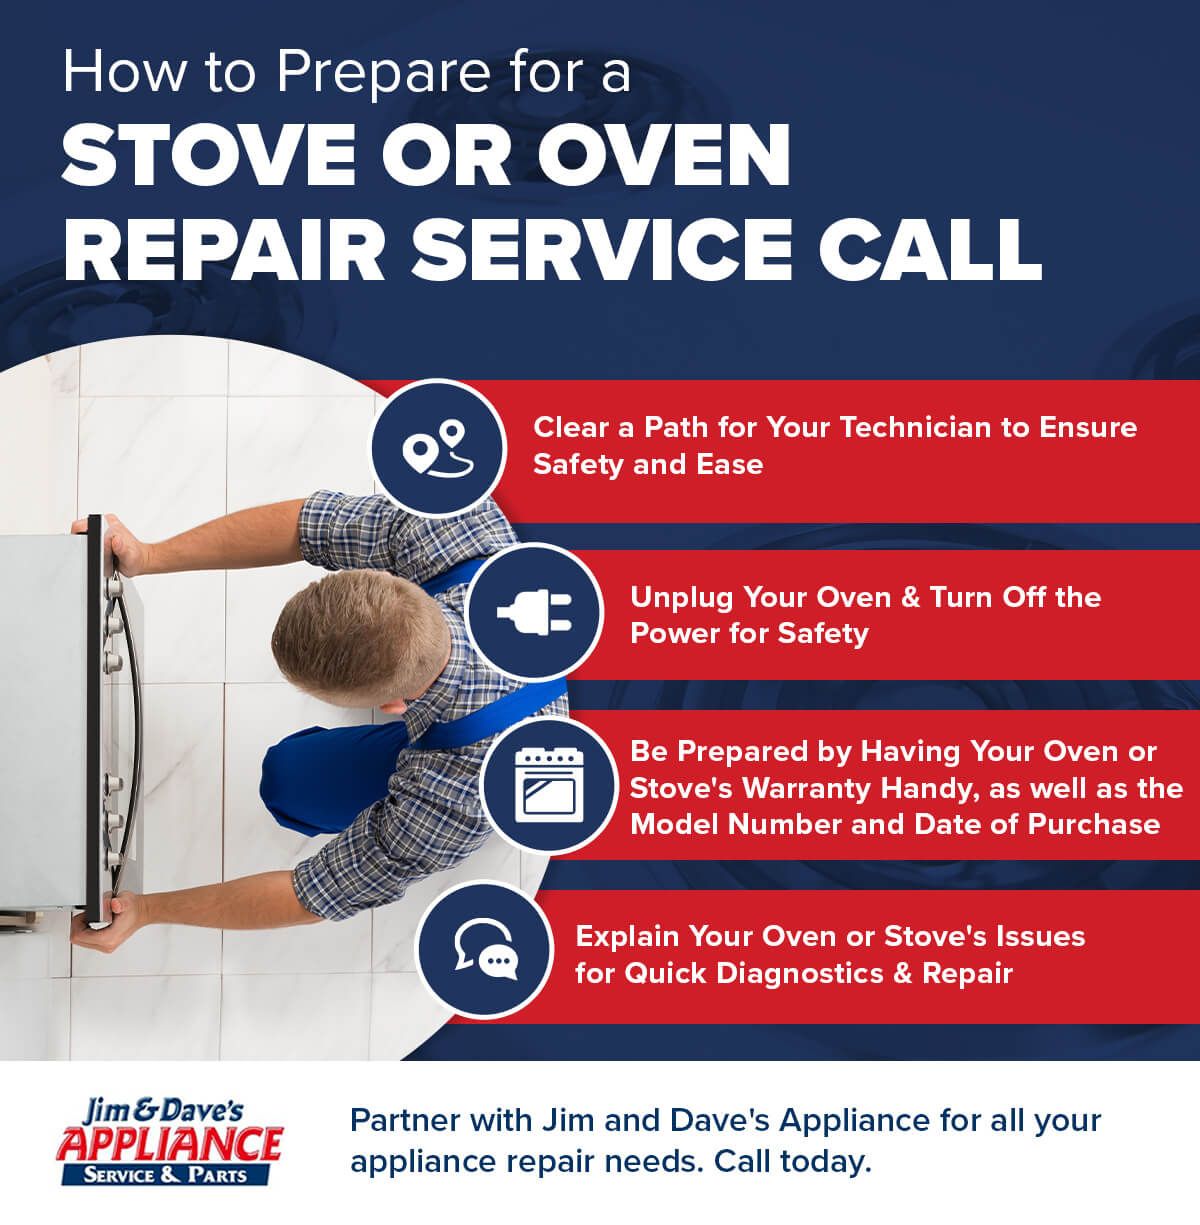 Your Guide on How to Prepare for a Stove or Oven Repair Service Call